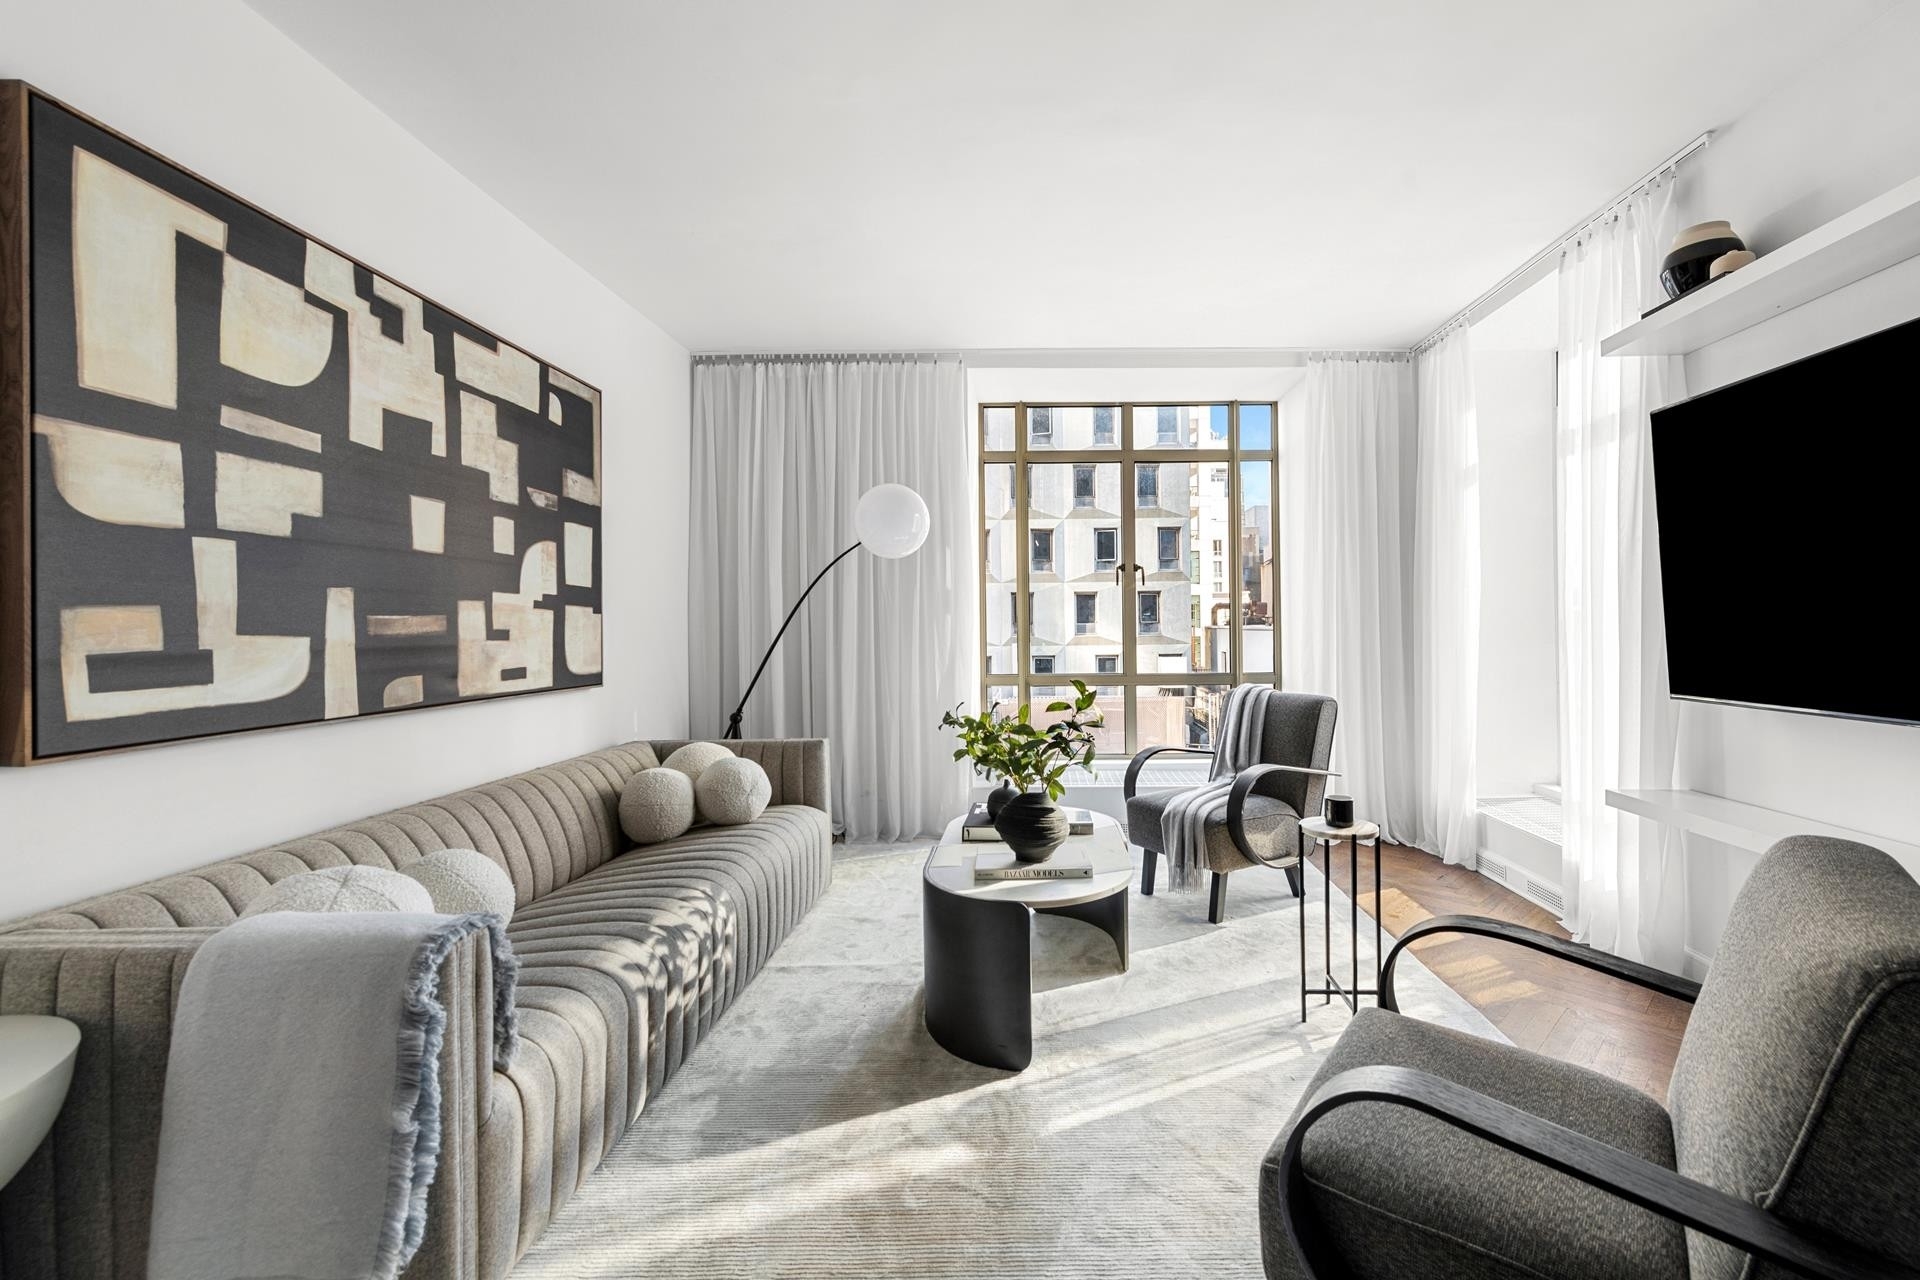 Co-op Properties for Sale at Rockefeller Apartments, 24 W 55TH ST, 11B Midtown West, New York, NY 10019